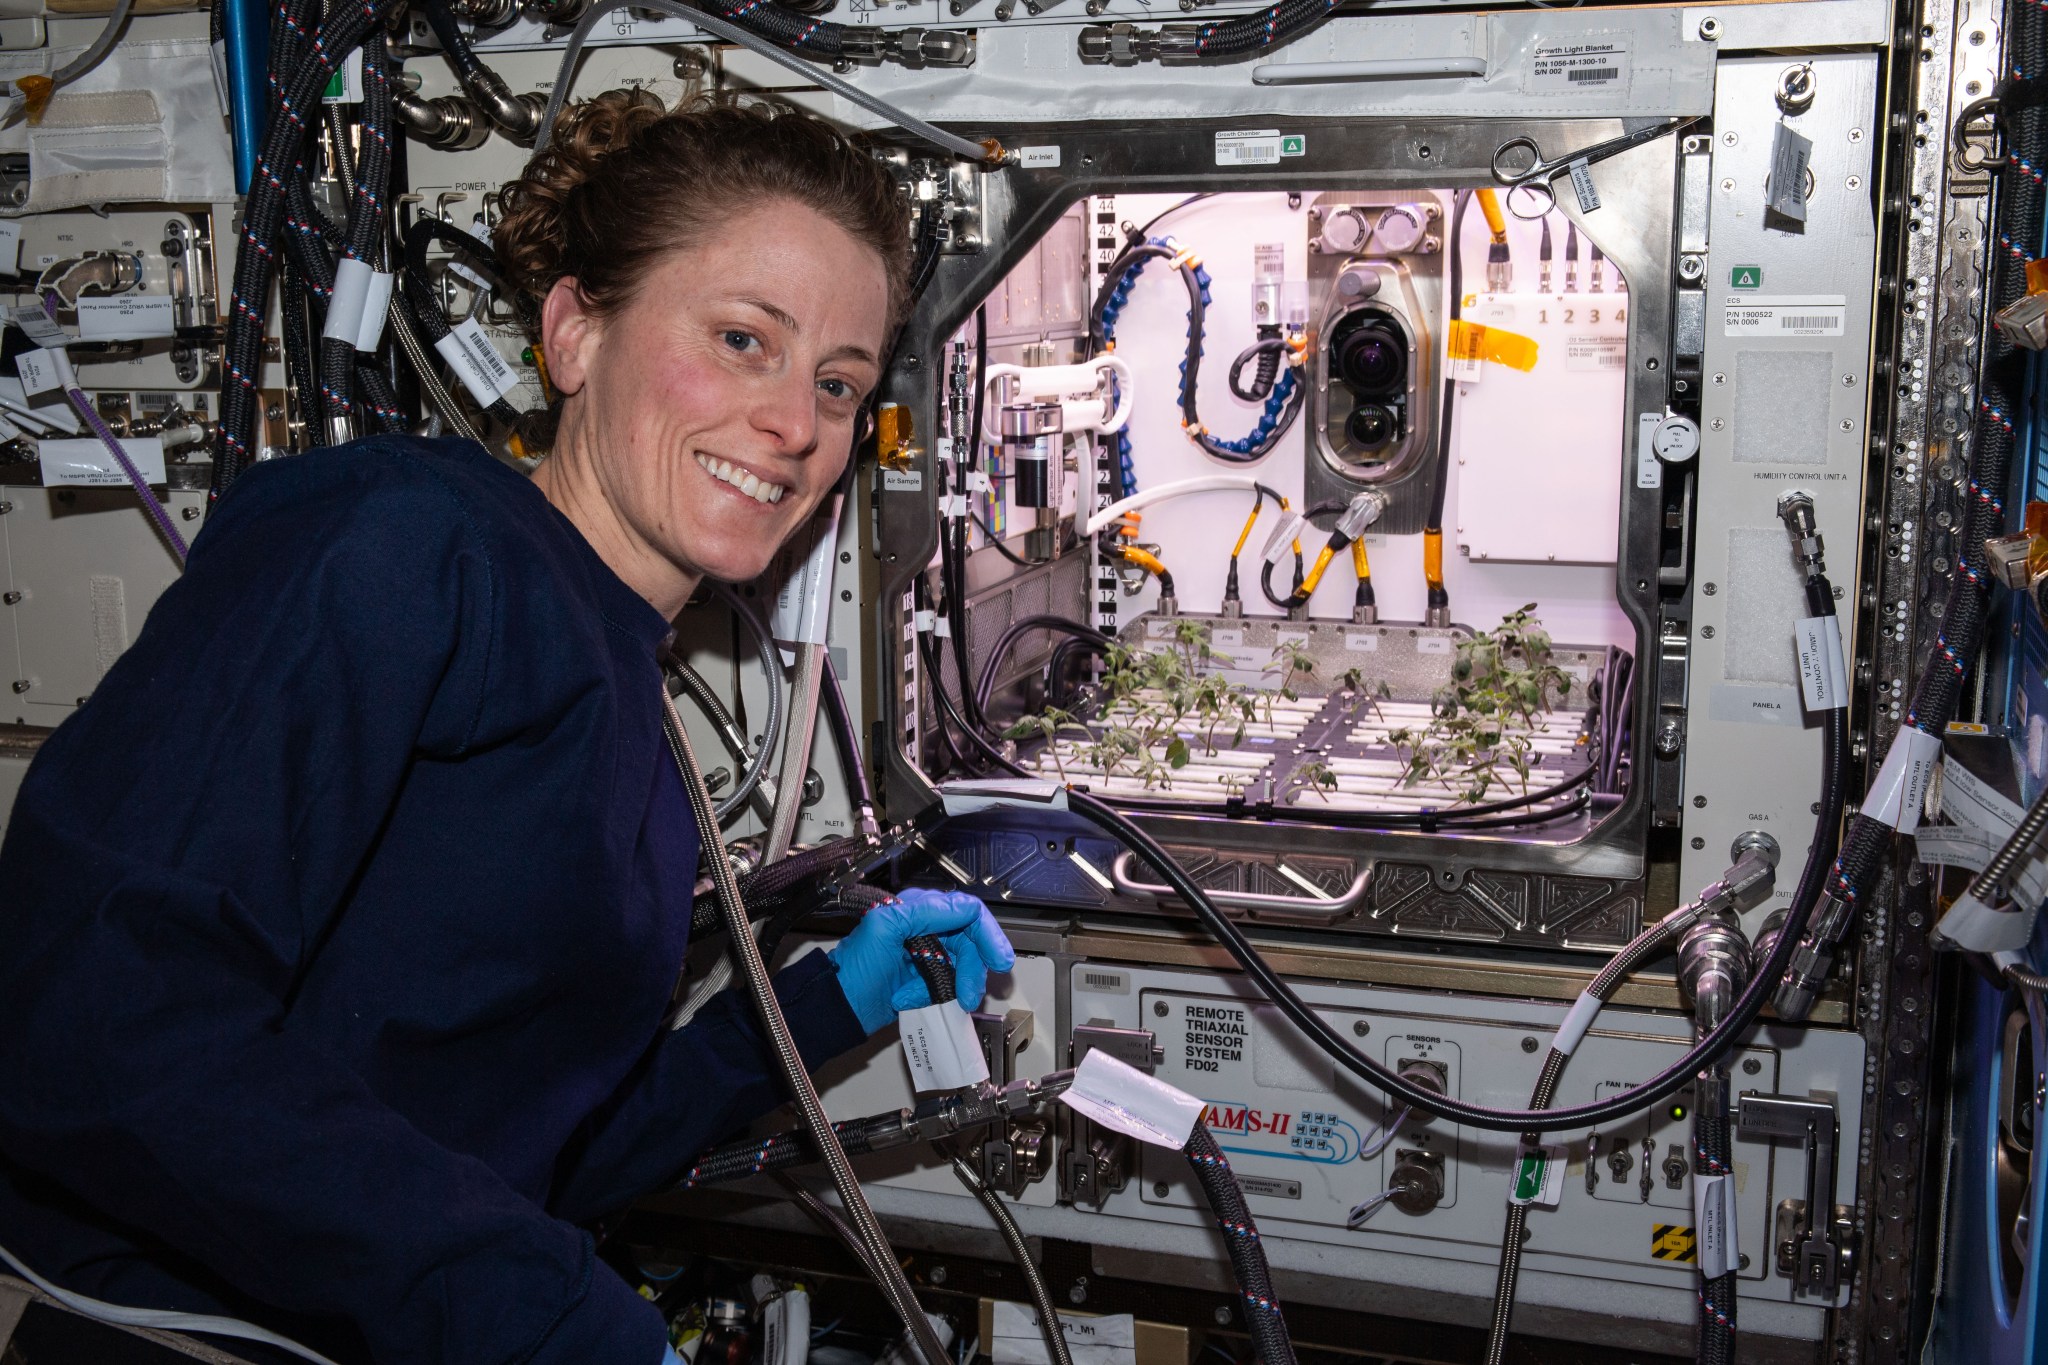 O’Hara is wearing a blue sweatshirt and light blue gloves and smiling at the camera. She has one hand on a tube connected to a large metal box that is lighted inside. The front of the box is open and inside multiple rows of small green plants are visible.